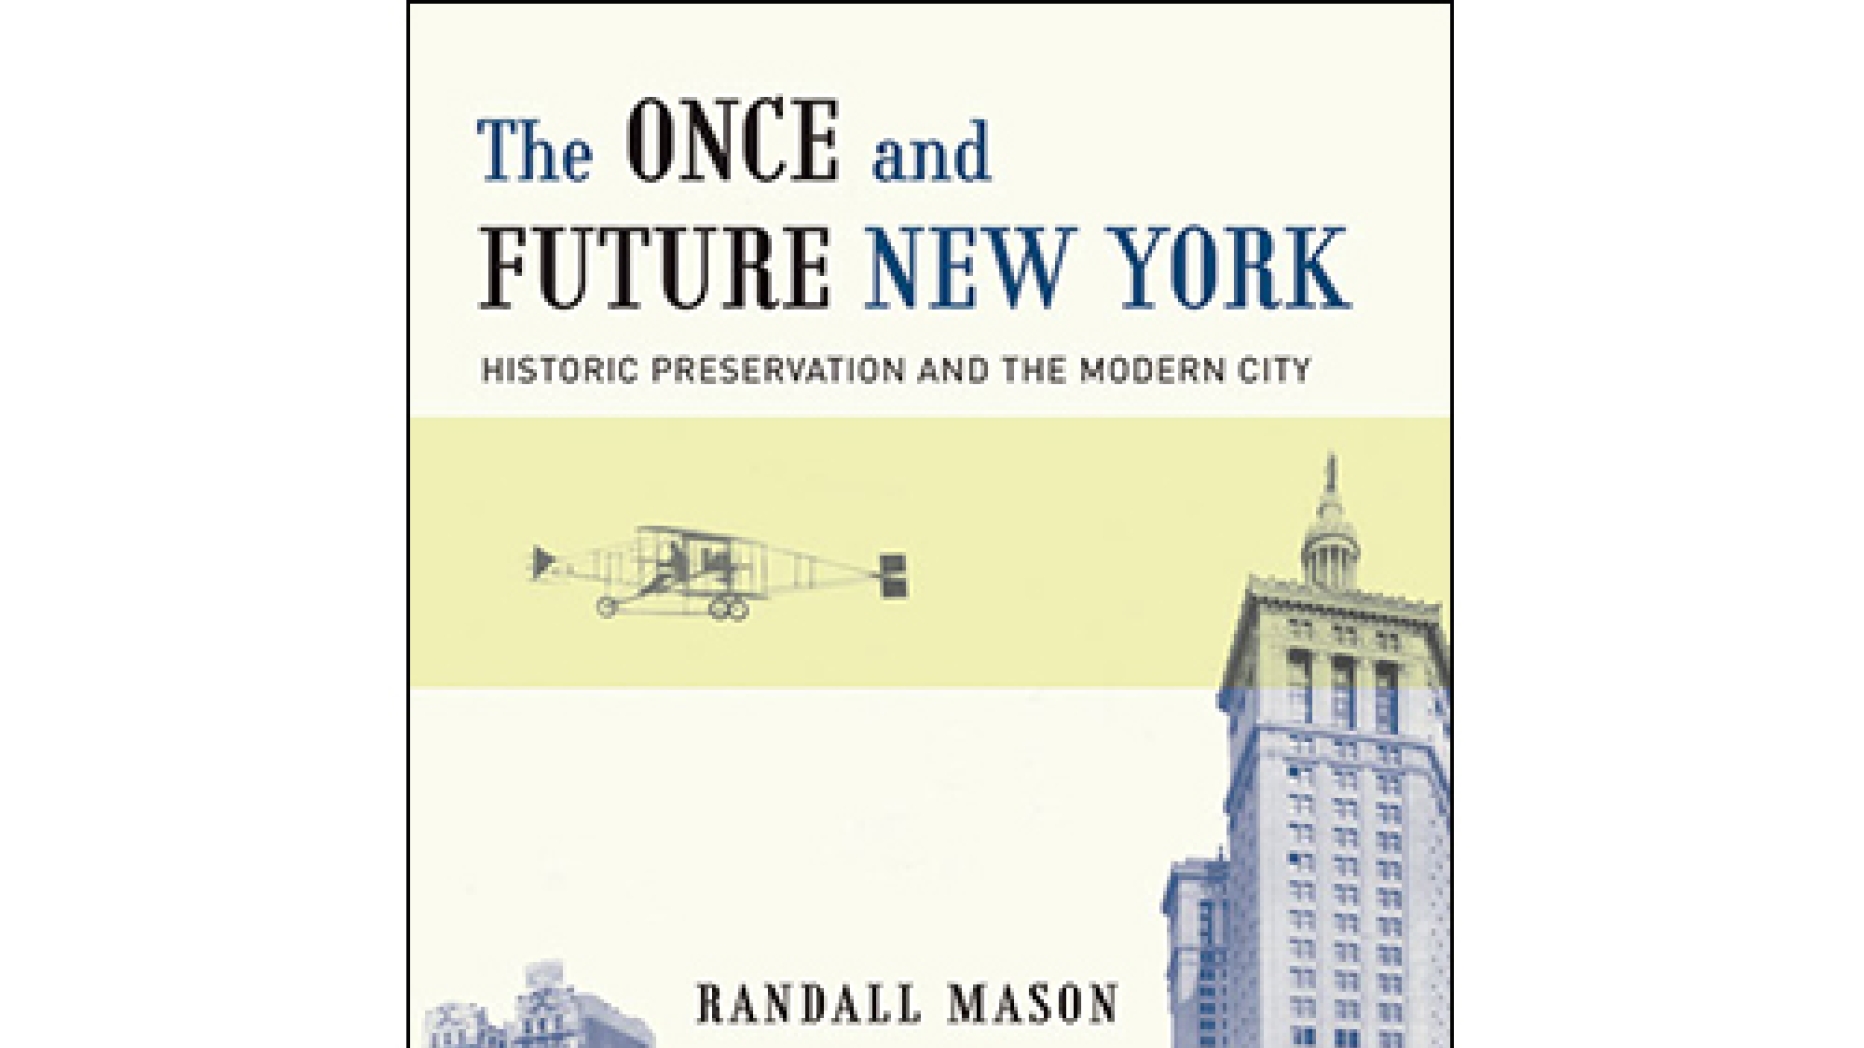 The Once and Future New York: Historic Preservation and the Modern City